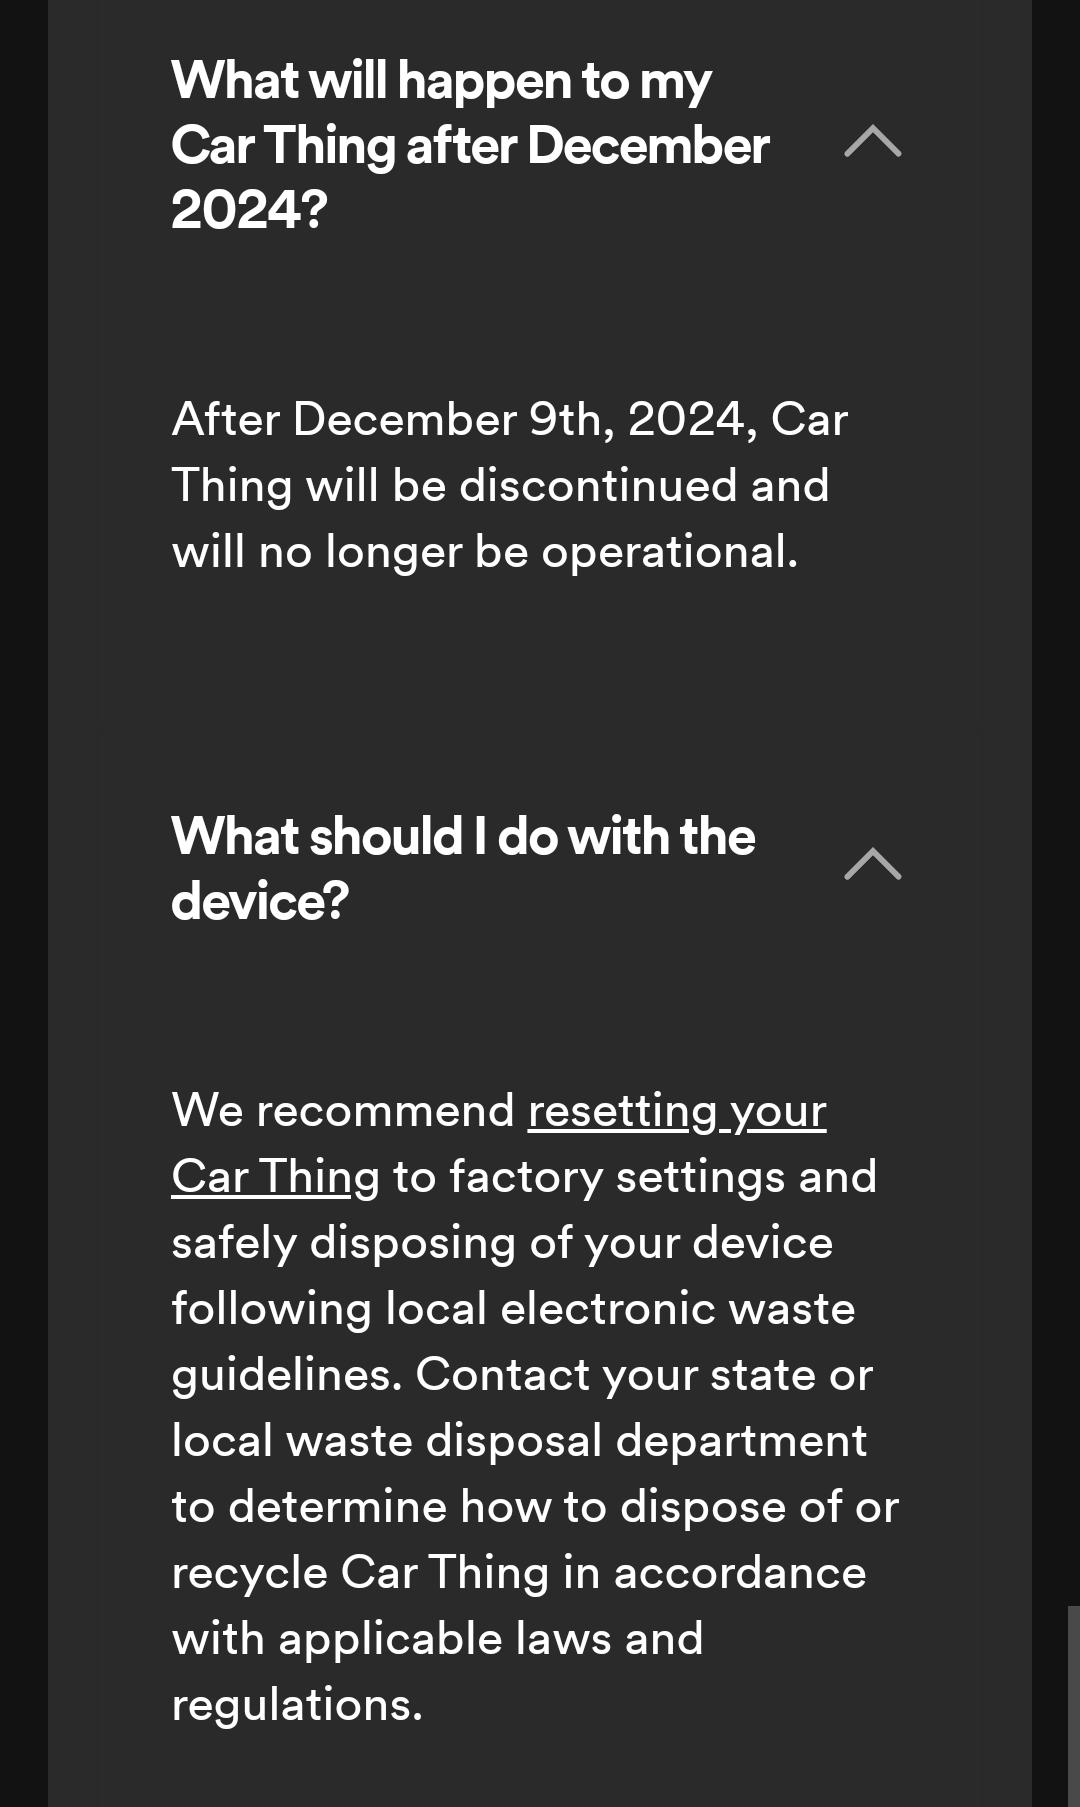 r/mildlyinfuriating - Spotify is dropping Car Thing and suggests to throw it away